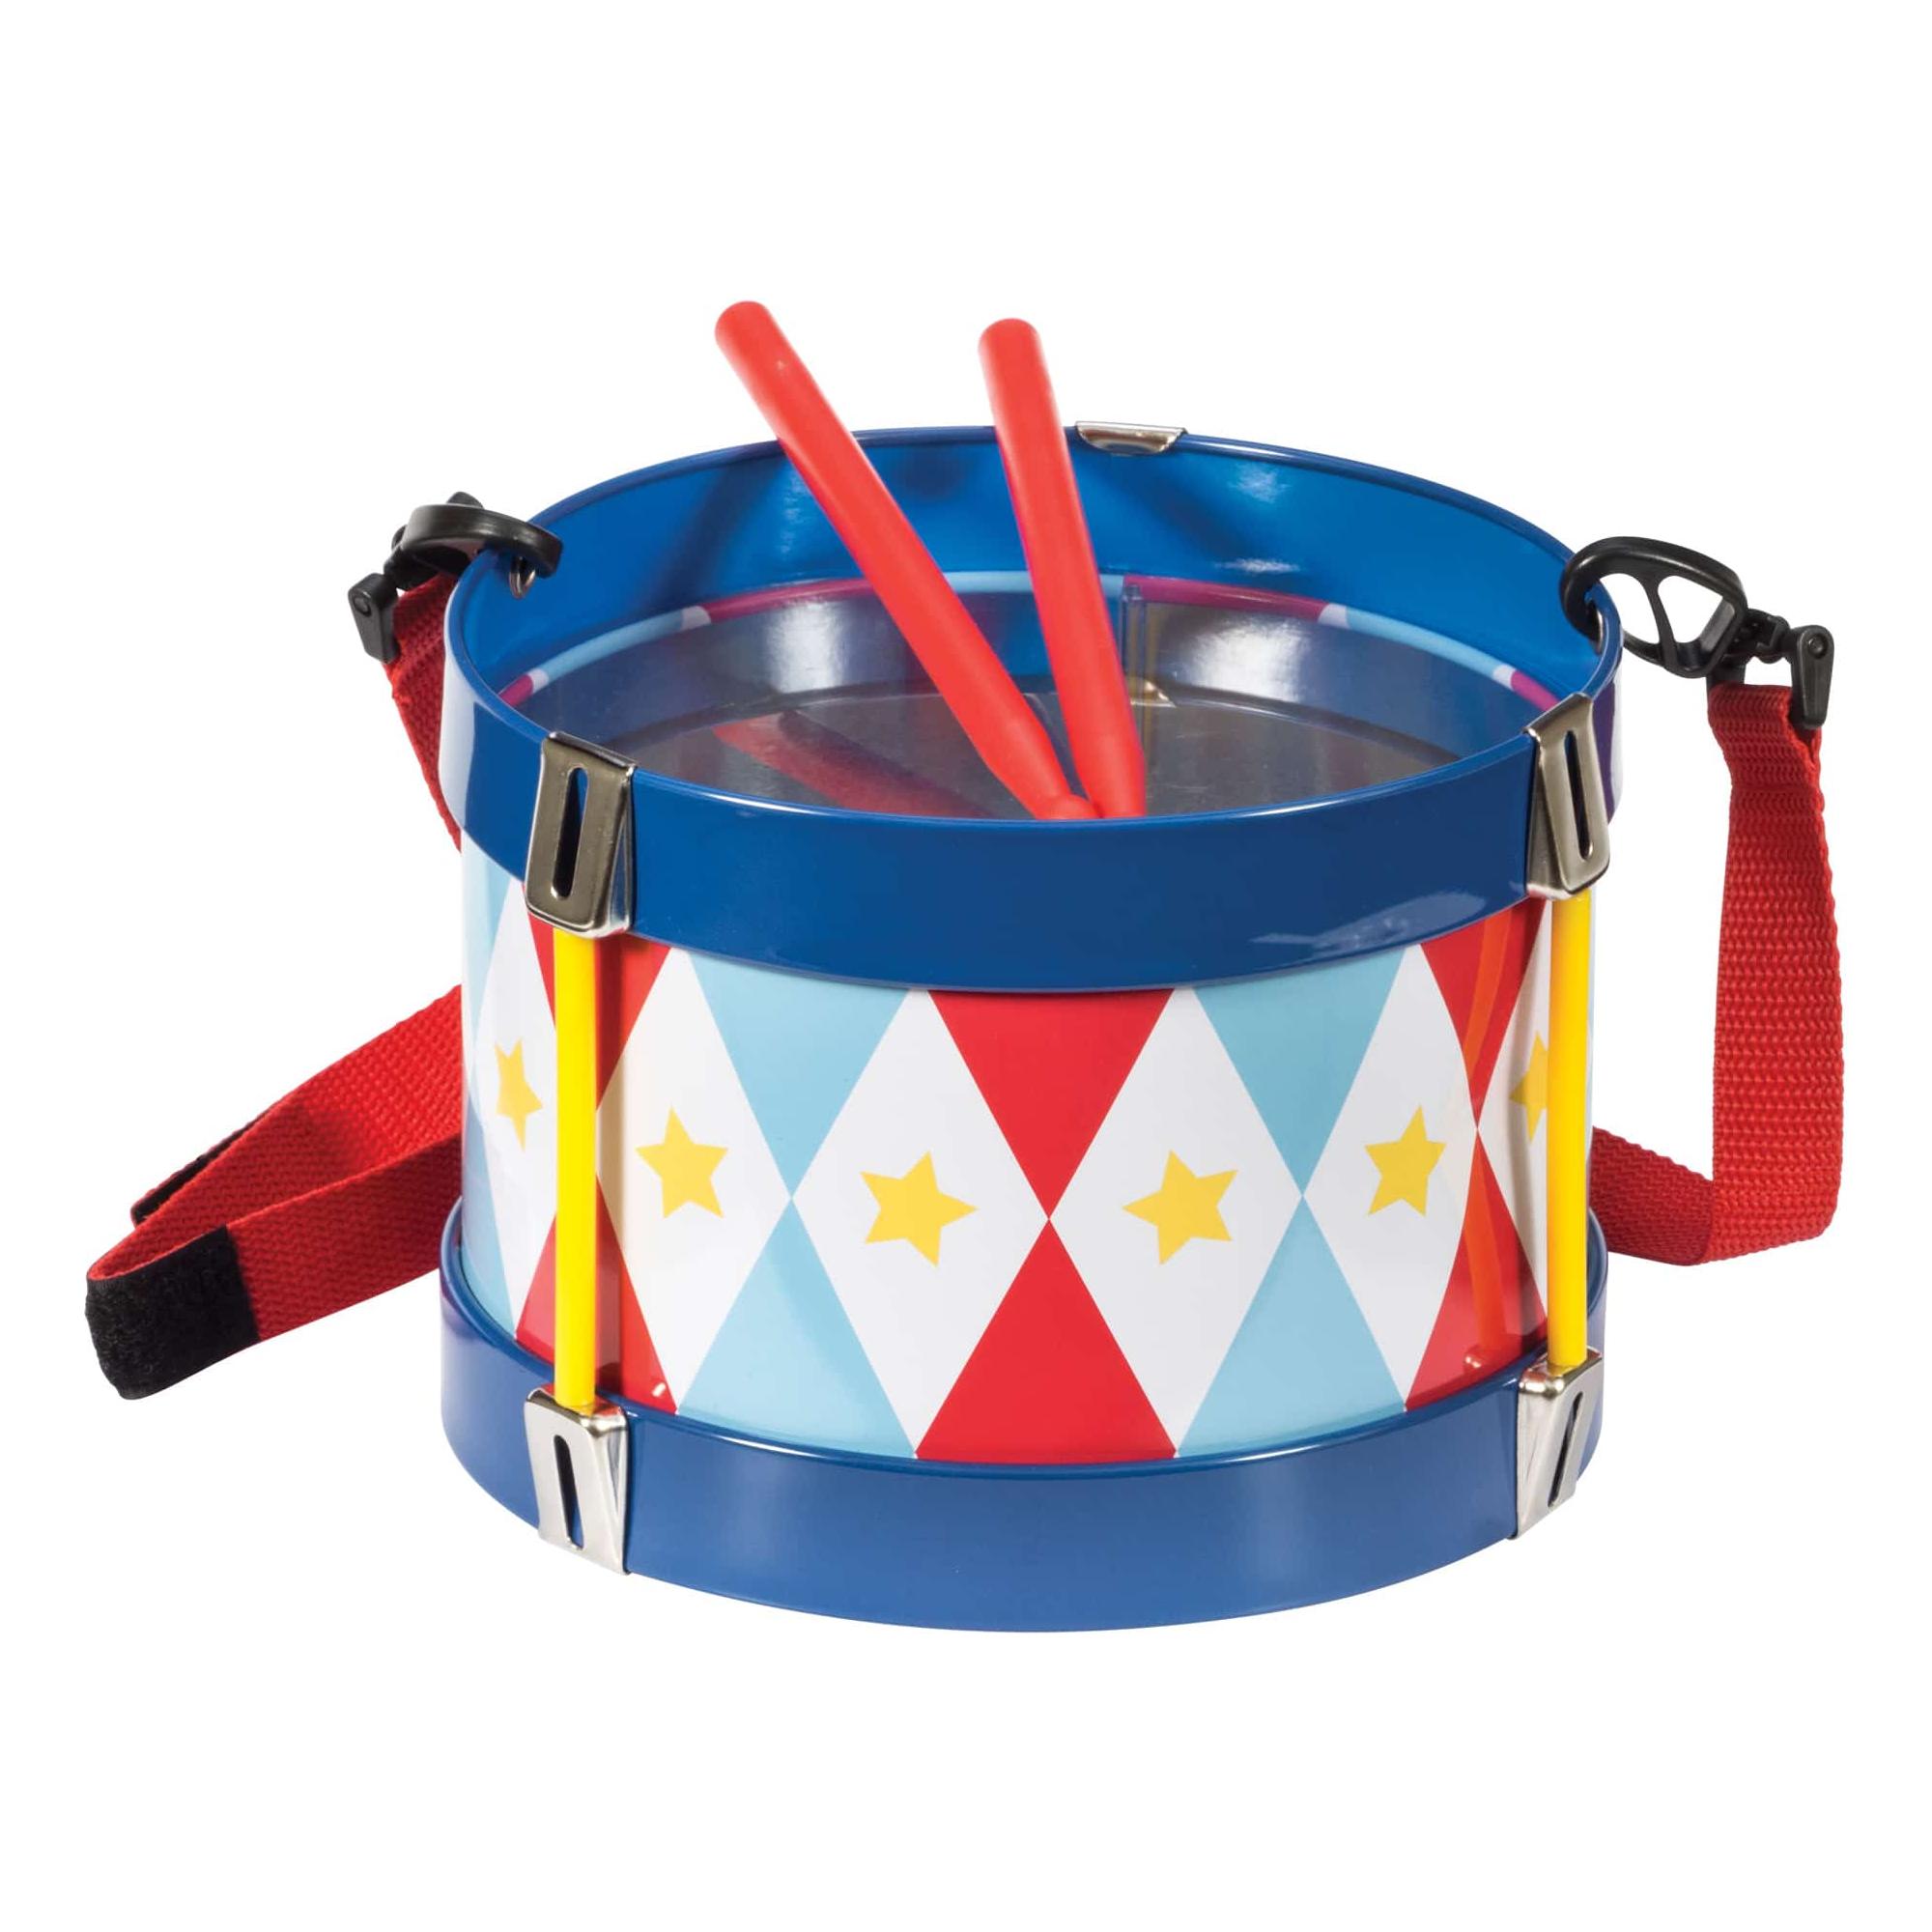 Schylling Music Tin Drum – The Rocking Horse Toys